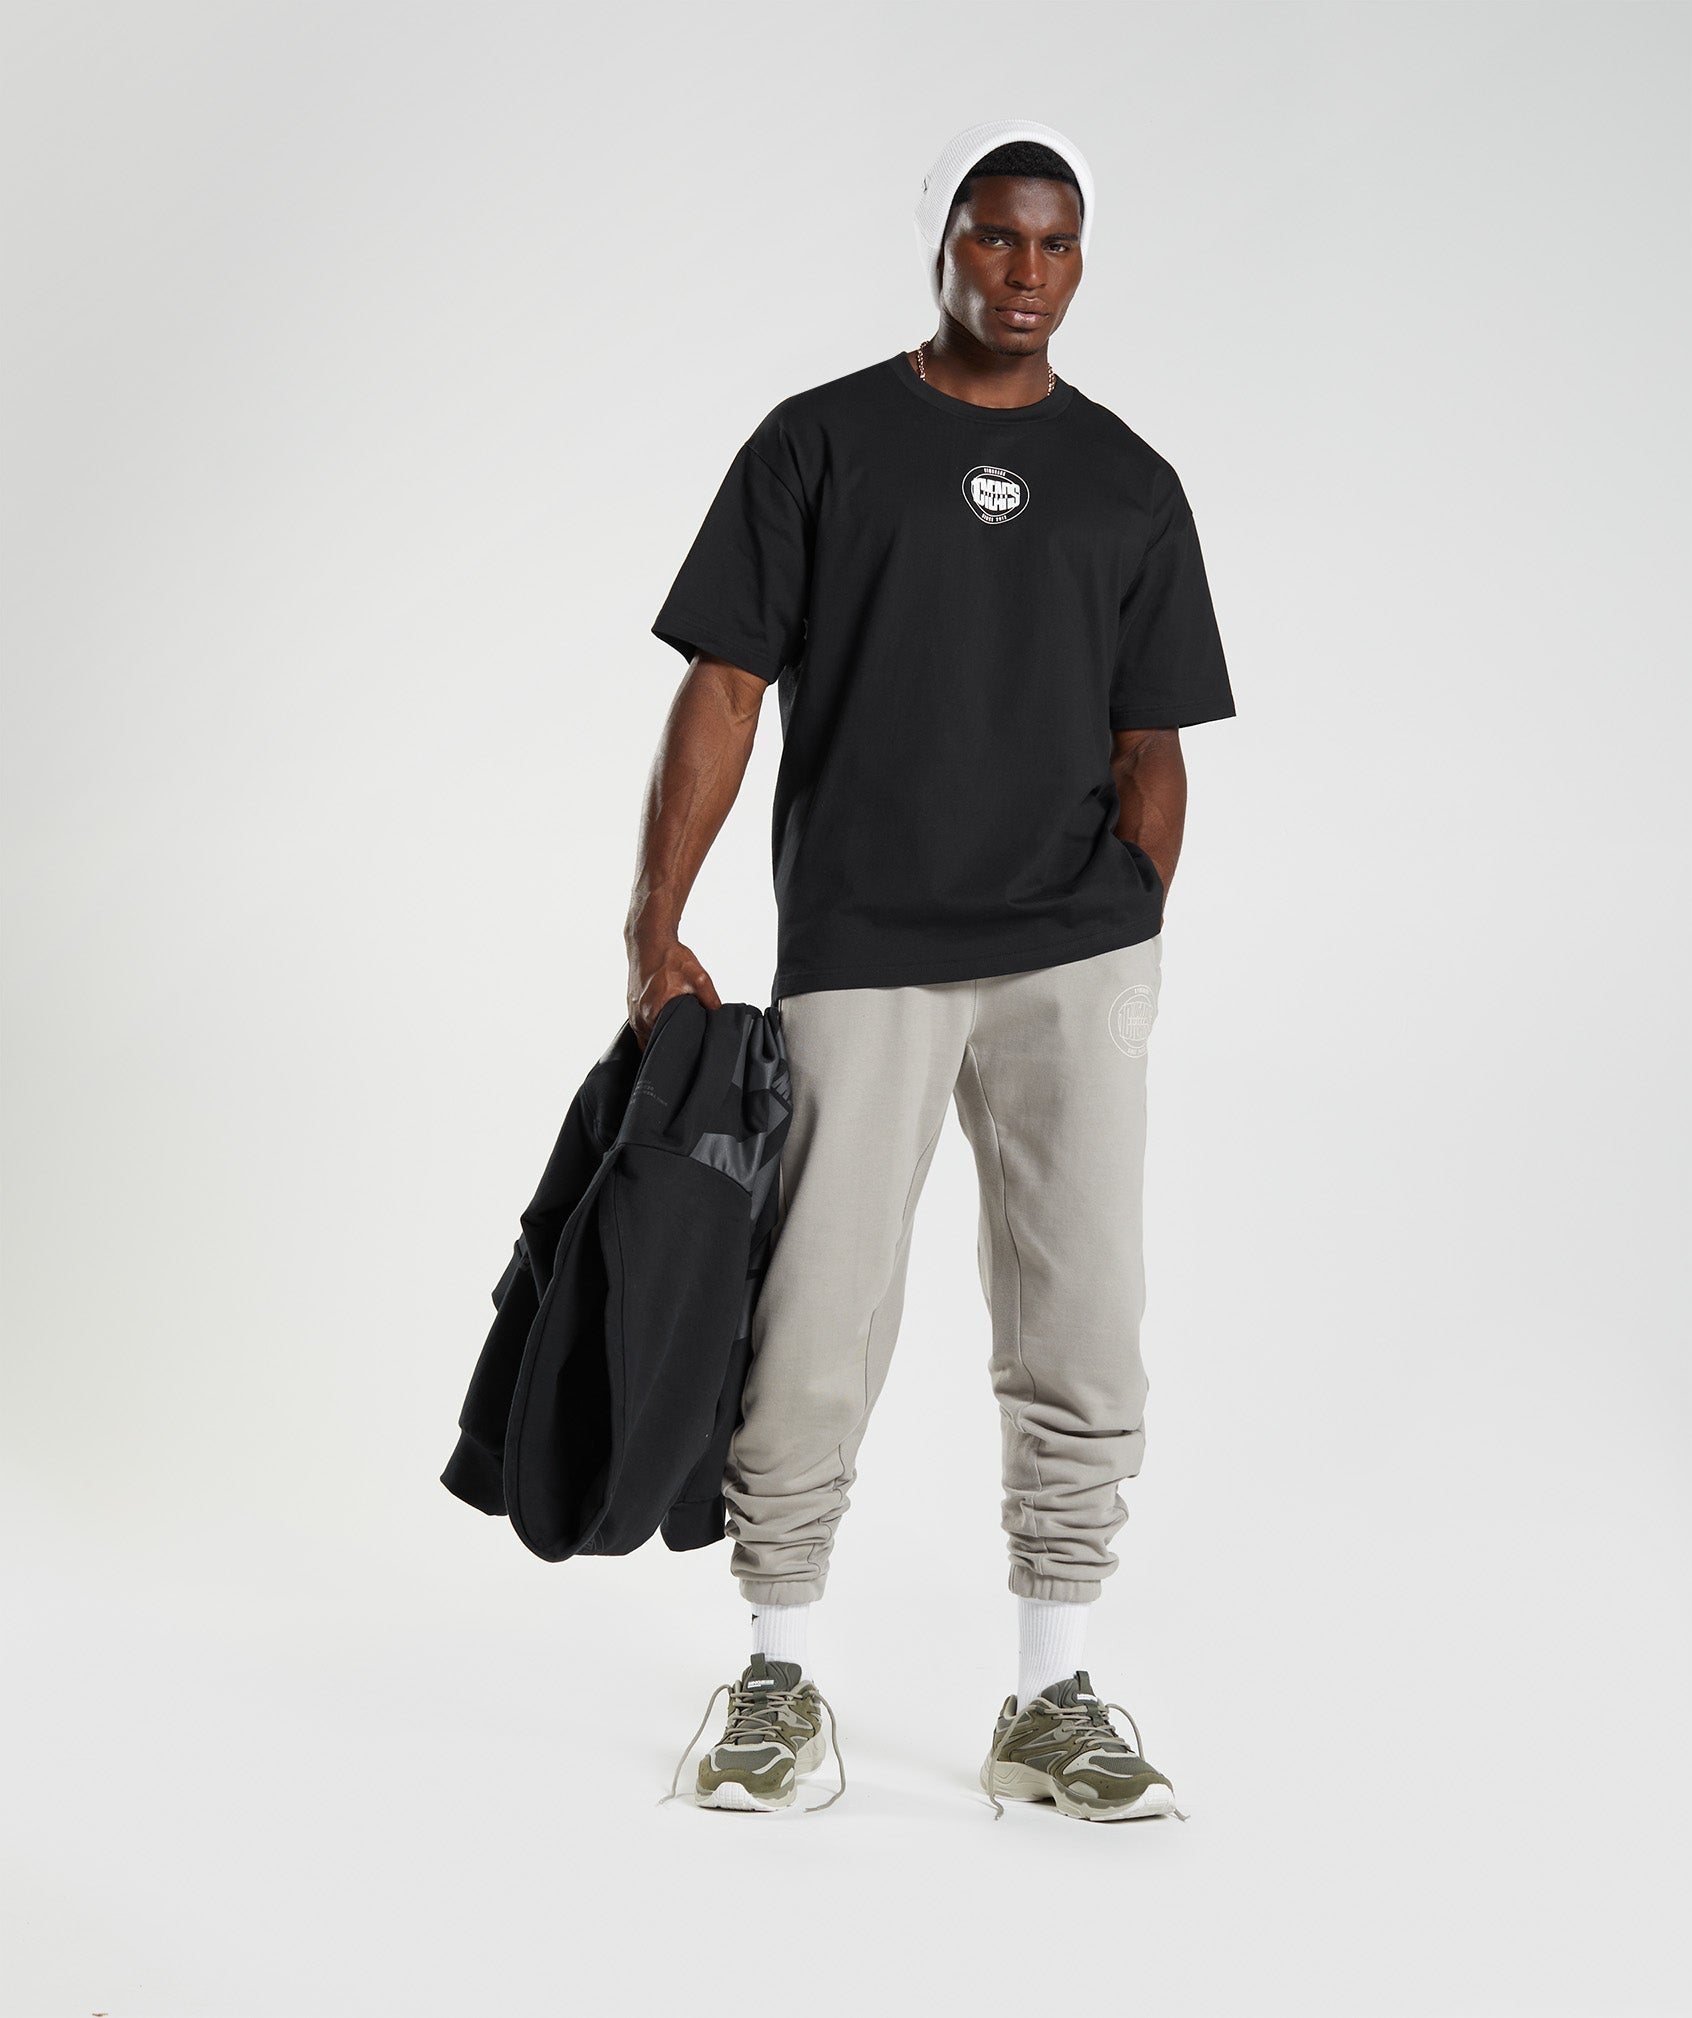 GS10 Year Oversized T-Shirt in Black - view 4